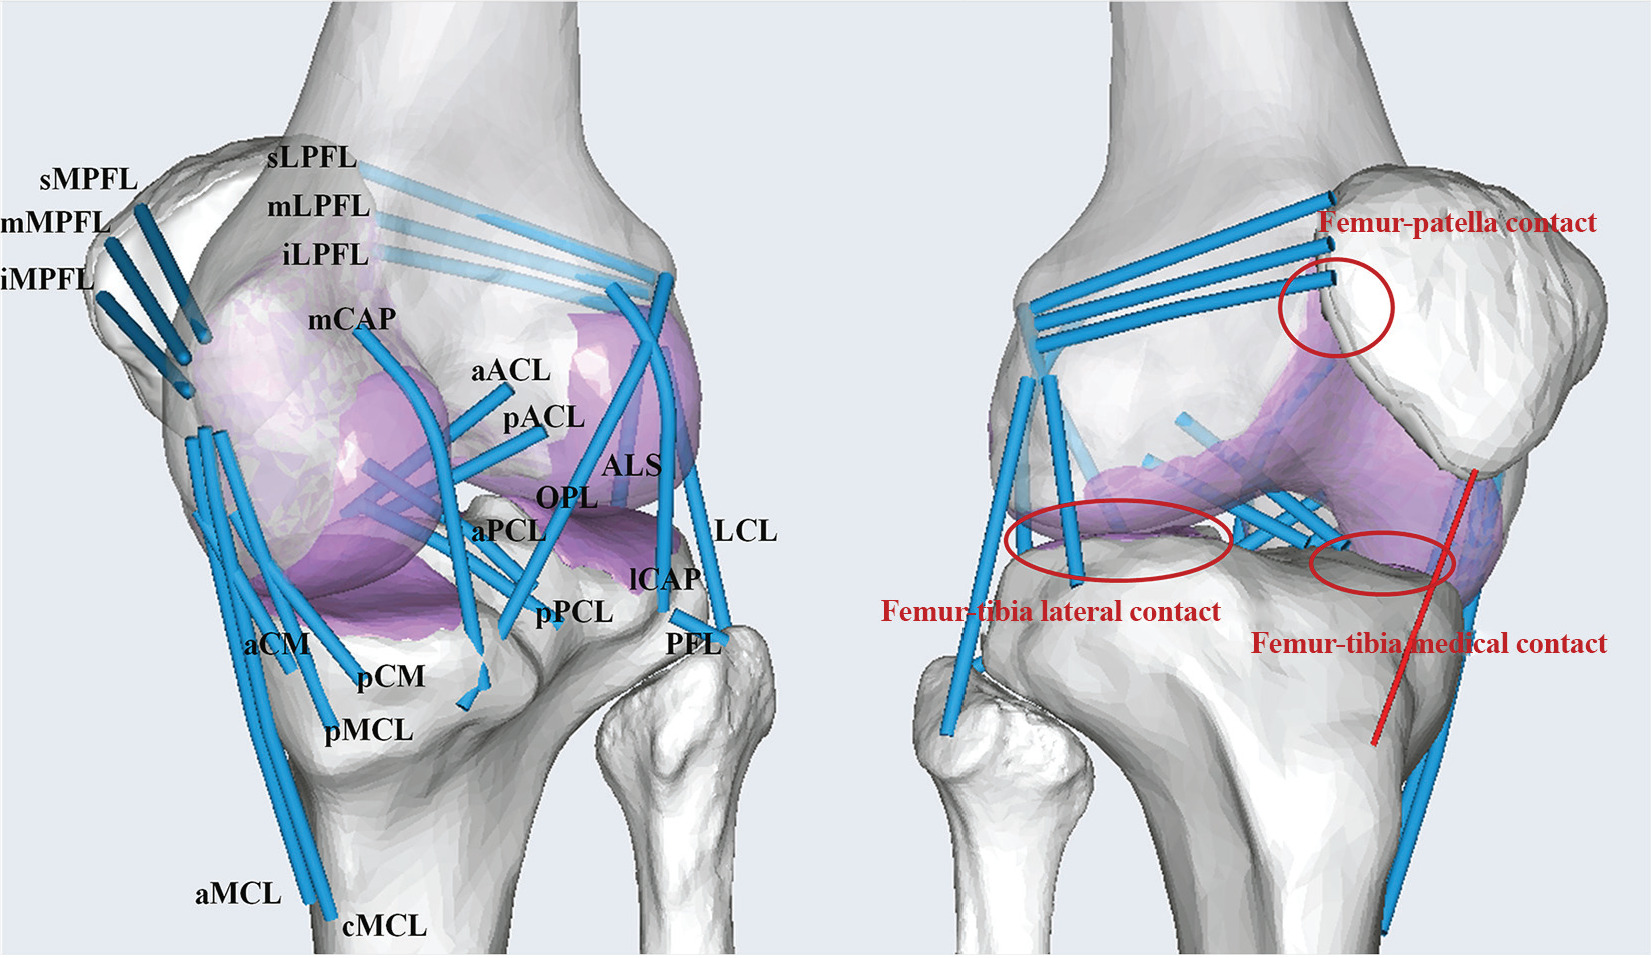 Fig. 1 
            Schematic of the knee model with contact conditions and 21 ligament bundle: The aACL and pACL; aPCL and pPCL; anterolateral structures; LCL; popliteofibular ligament PFL; medial collateral ligament (aMCL, cMCL, and pMCL); deep medial collateral ligament (aCM and pCM); medial and lateral posterior capsules (mCAP and lCAP, respectively); oblique popliteal ligament; medial patellofemoral ligament (sMPFL, mMPFL, and iMPFL); and lateral patellofemoral ligament (sLPFL, mLPFL, and iLPFL).
          